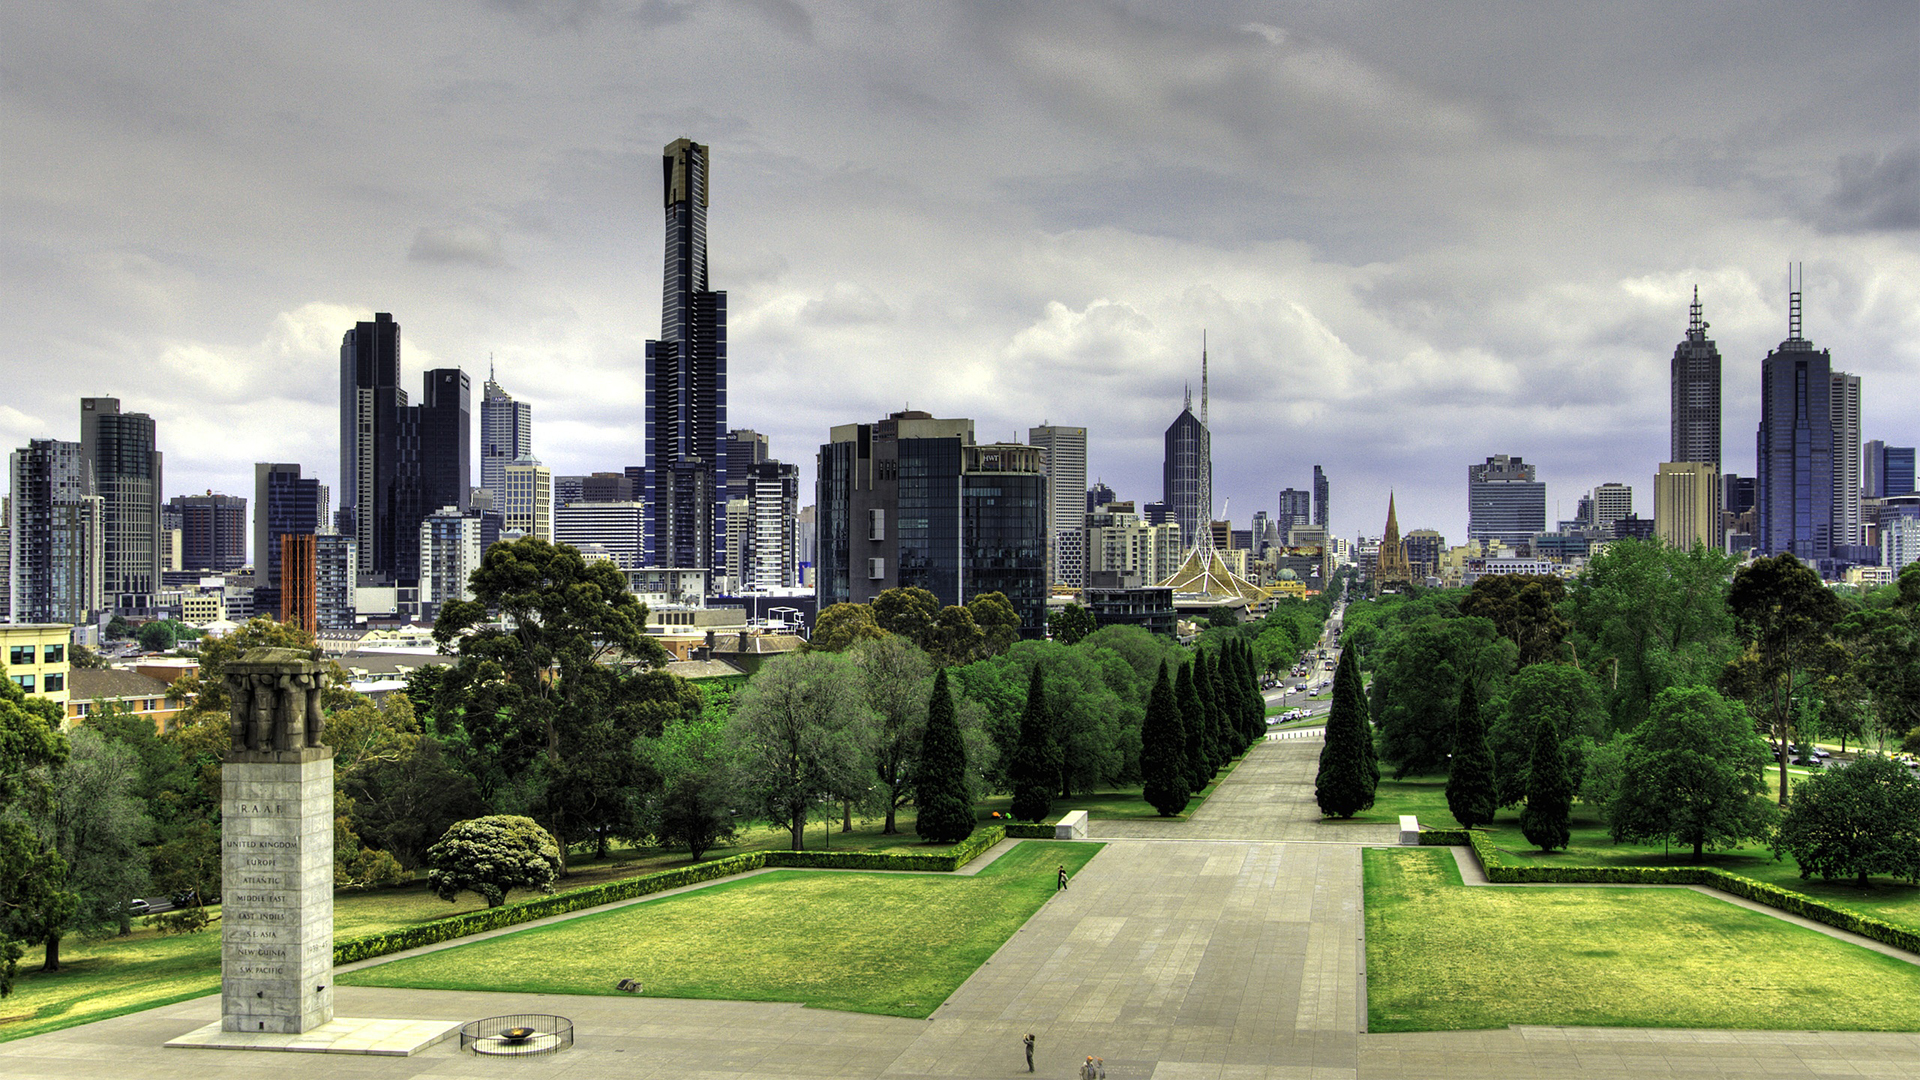 Wallpapers Melbourne Free Hd Hdr And 1920x1080 #melbourne